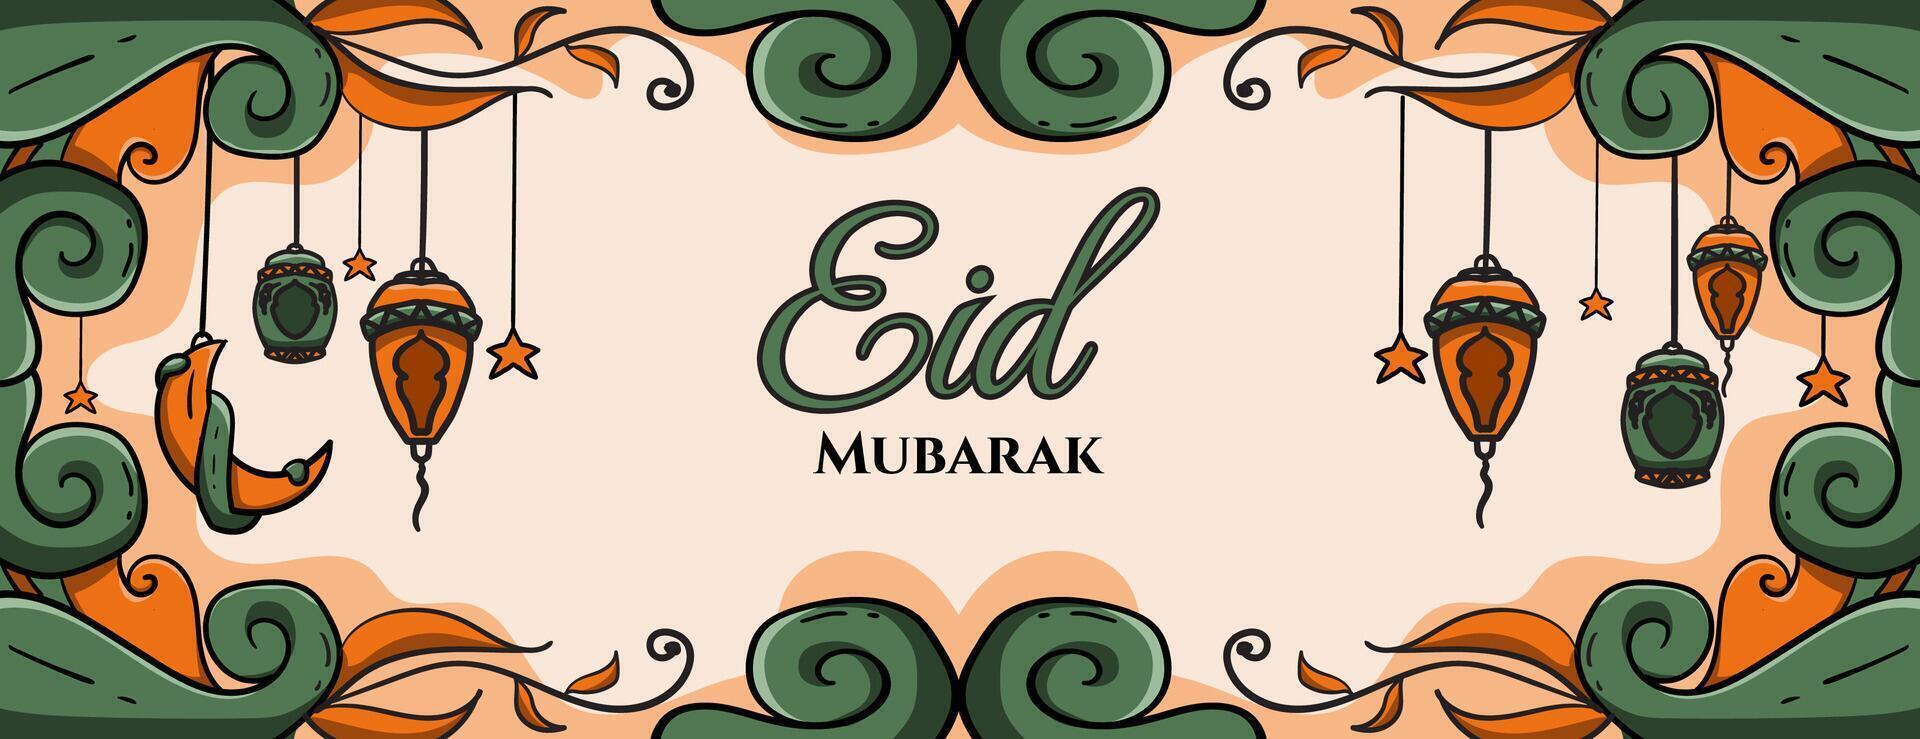 hand drawn islamic illustration ornament in green and orange color.great for  eid mubarak banner, ramadan kareem banner, and other islamic holiday. vector illustration